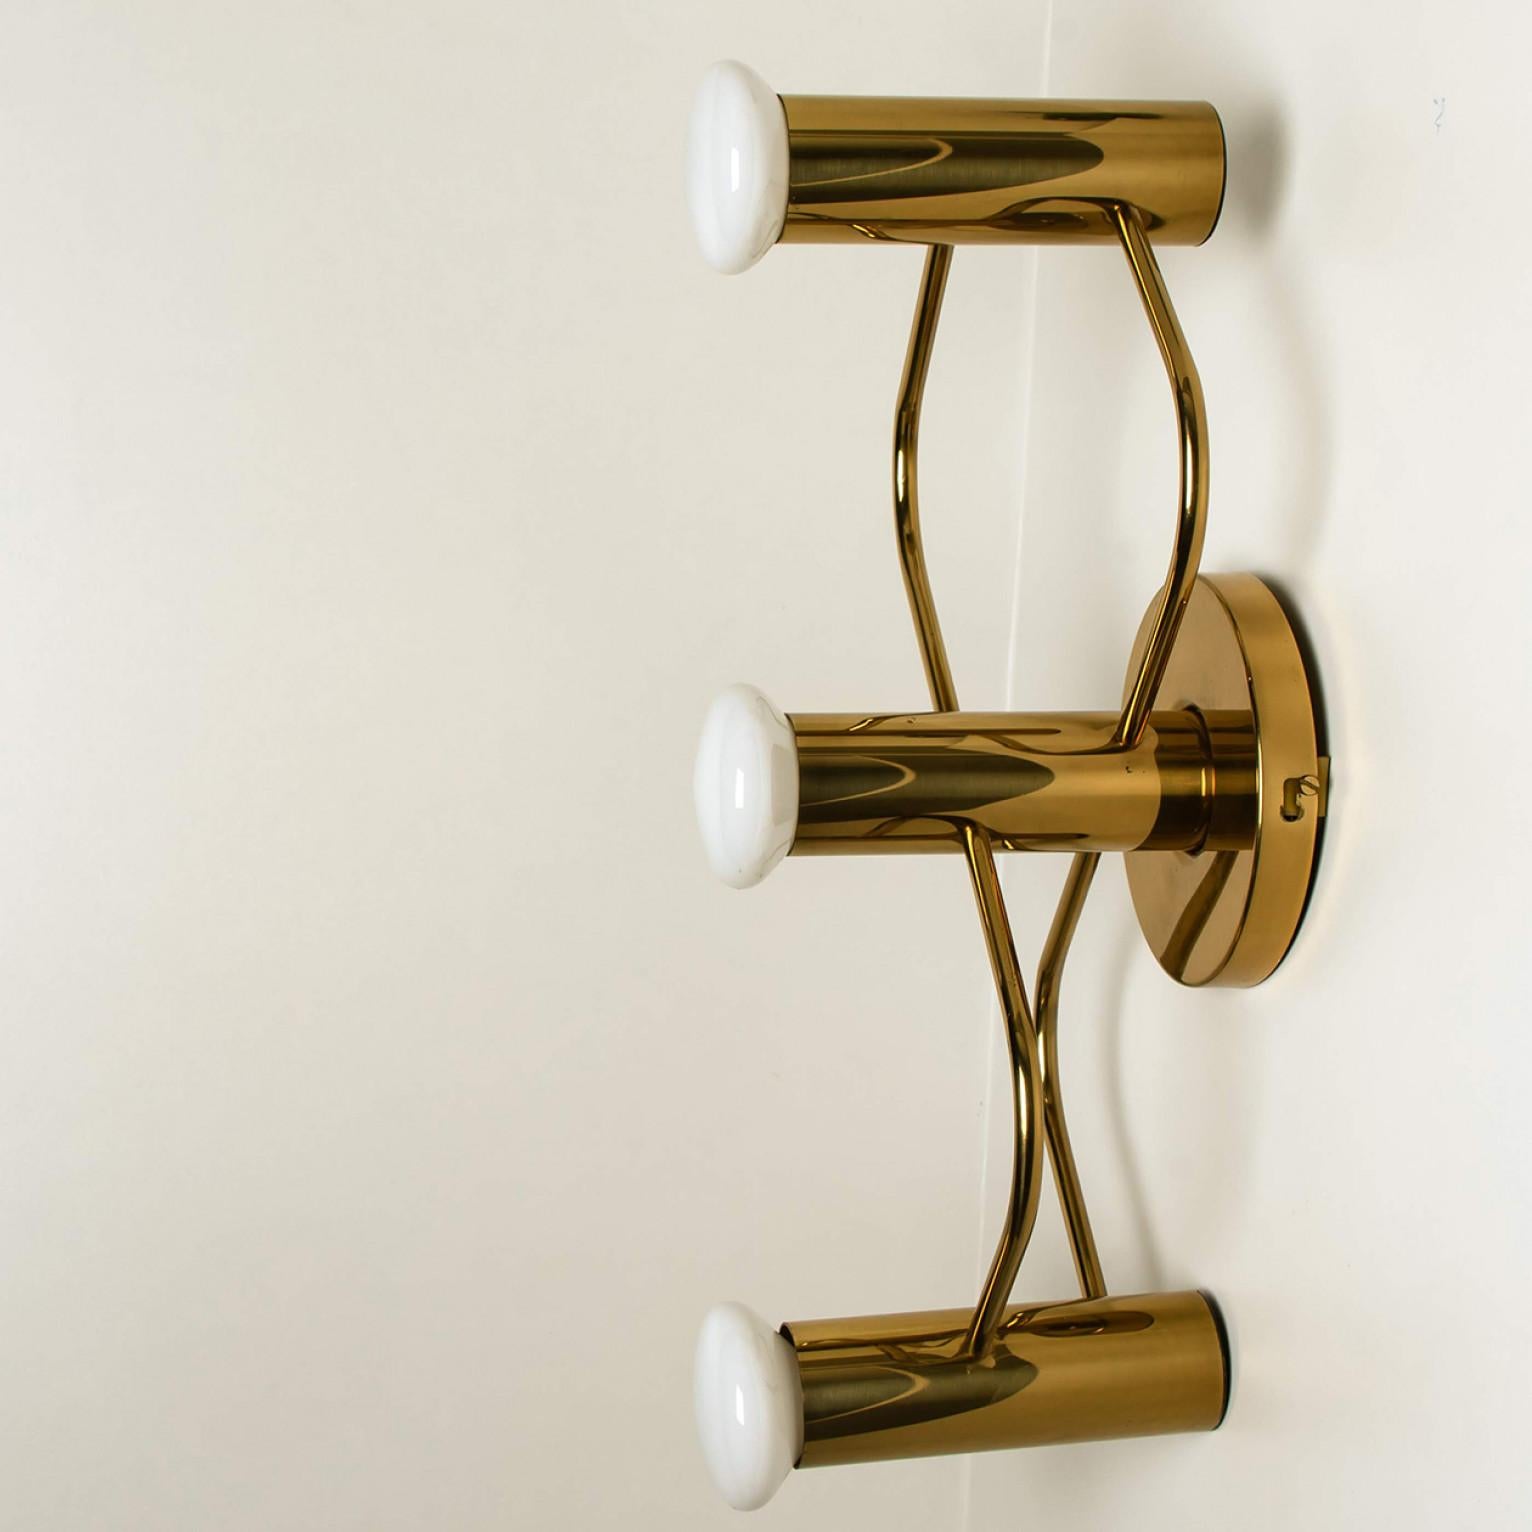 German Pair of Sculptural Brass Wall Lights Flush Mounts by Leola, 1970s For Sale